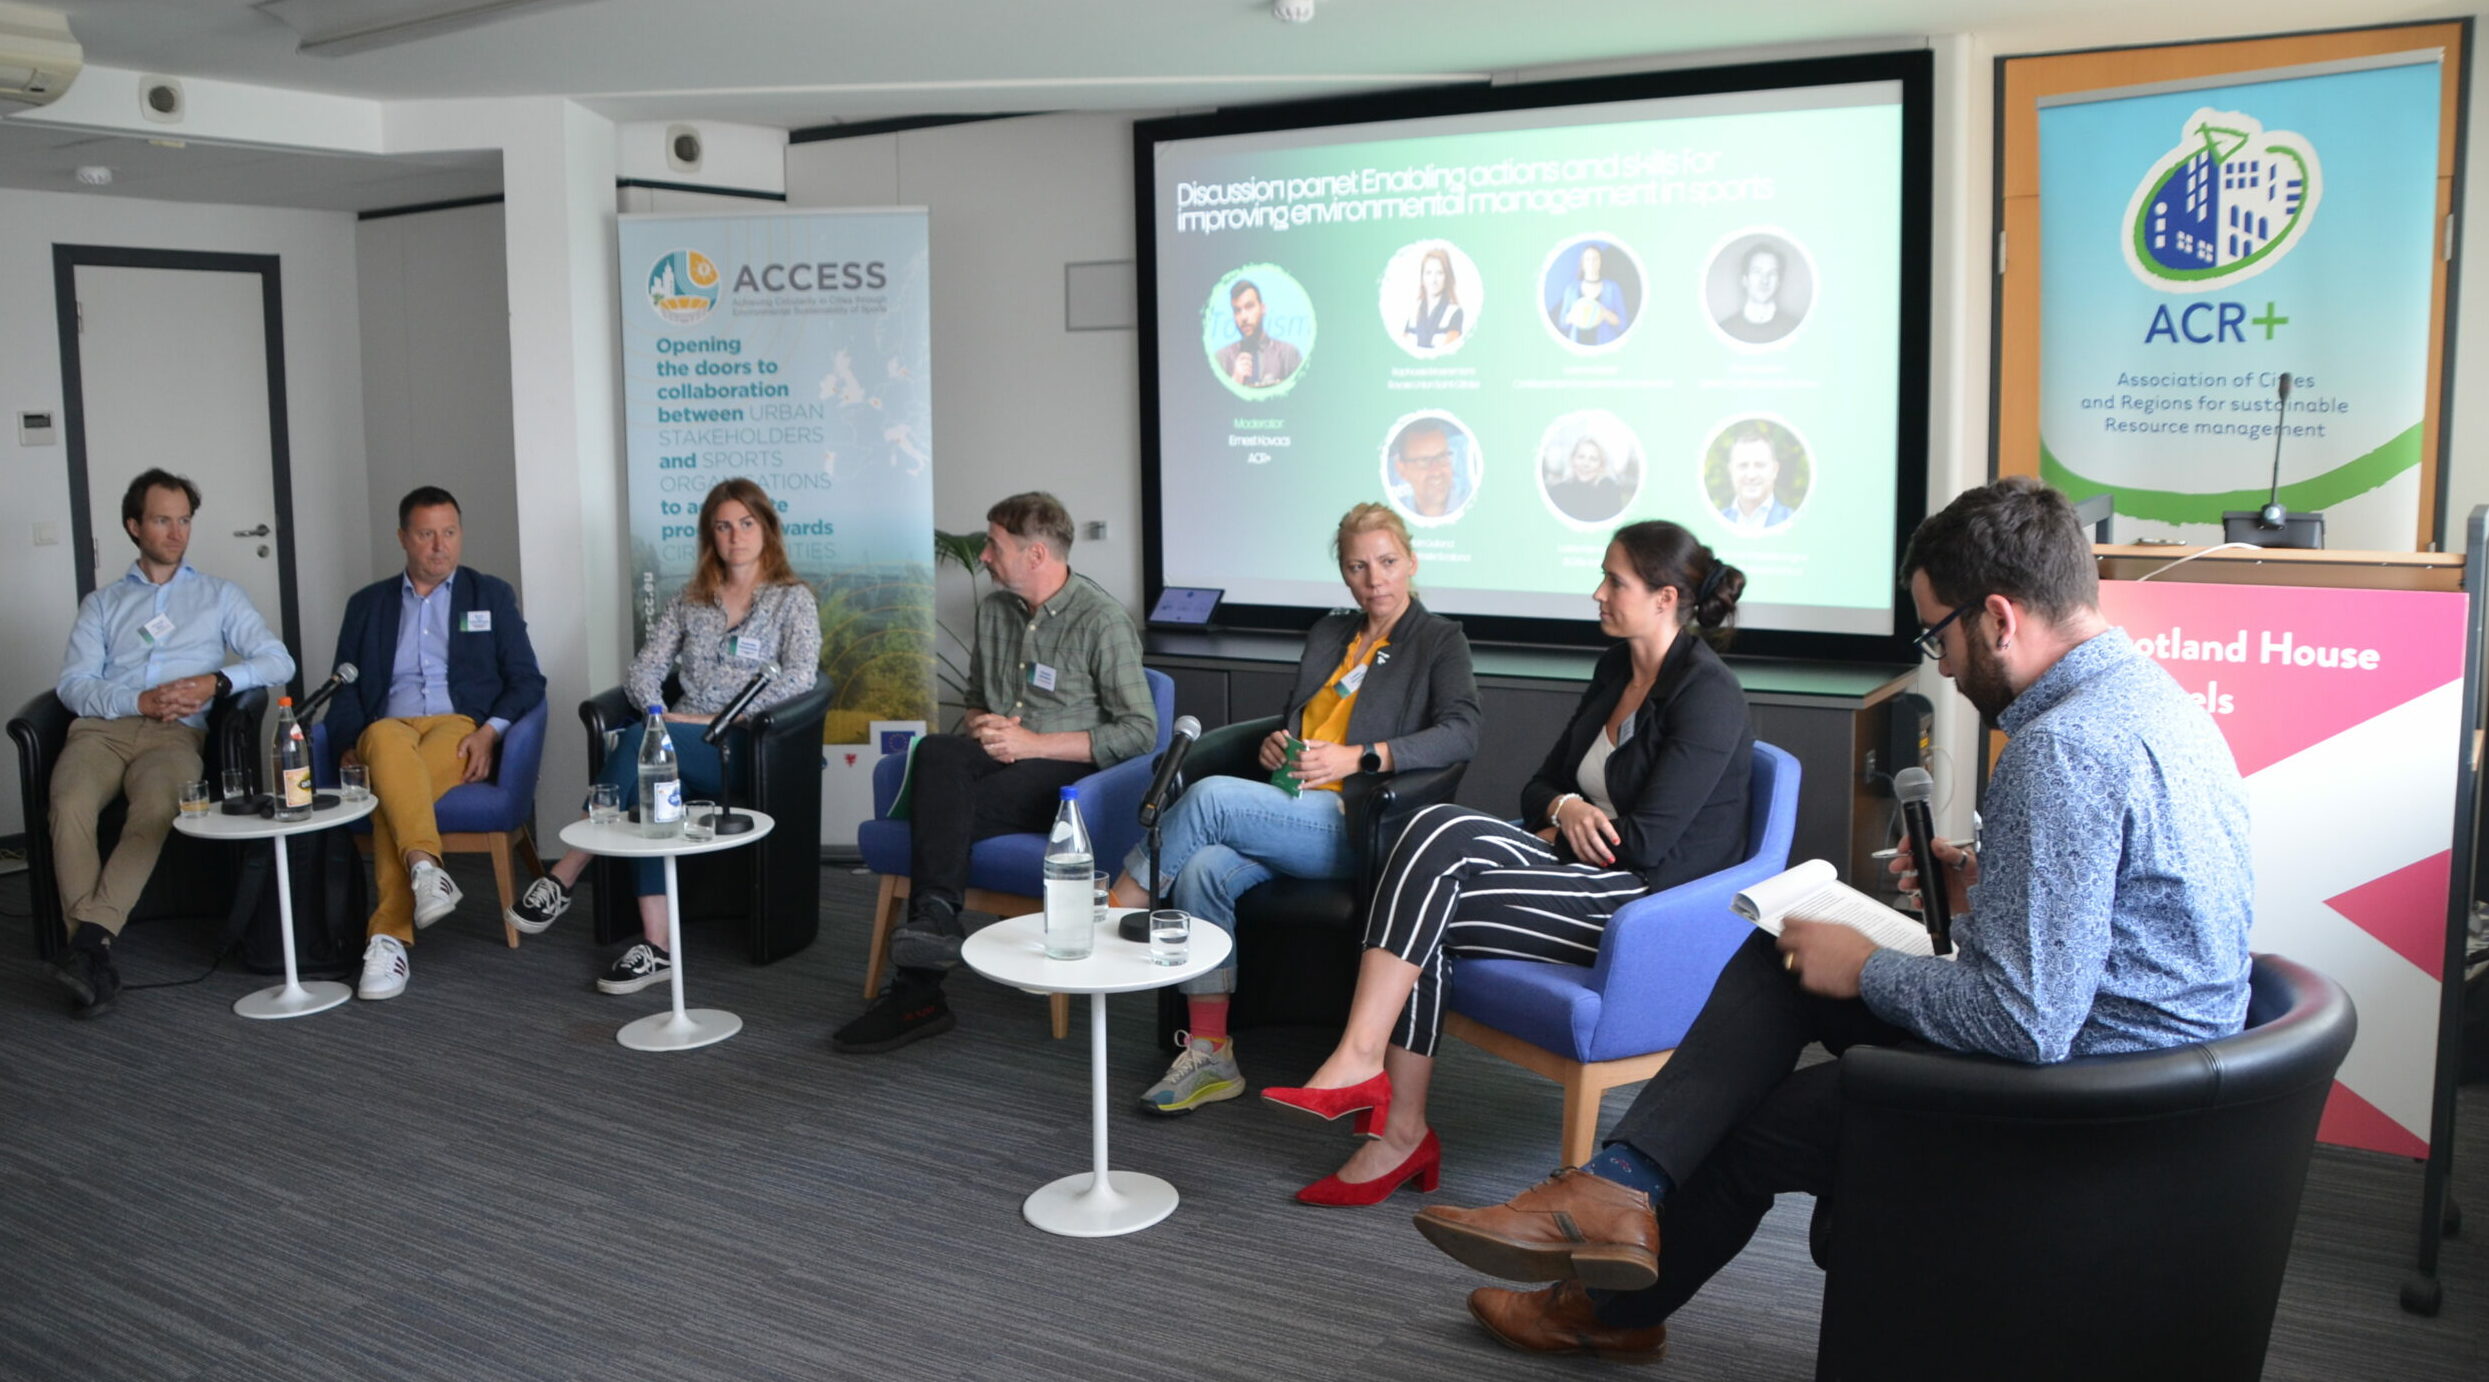 A notable appearance at EU Green Week as ACCESS gets featured at ACR+ official partner event